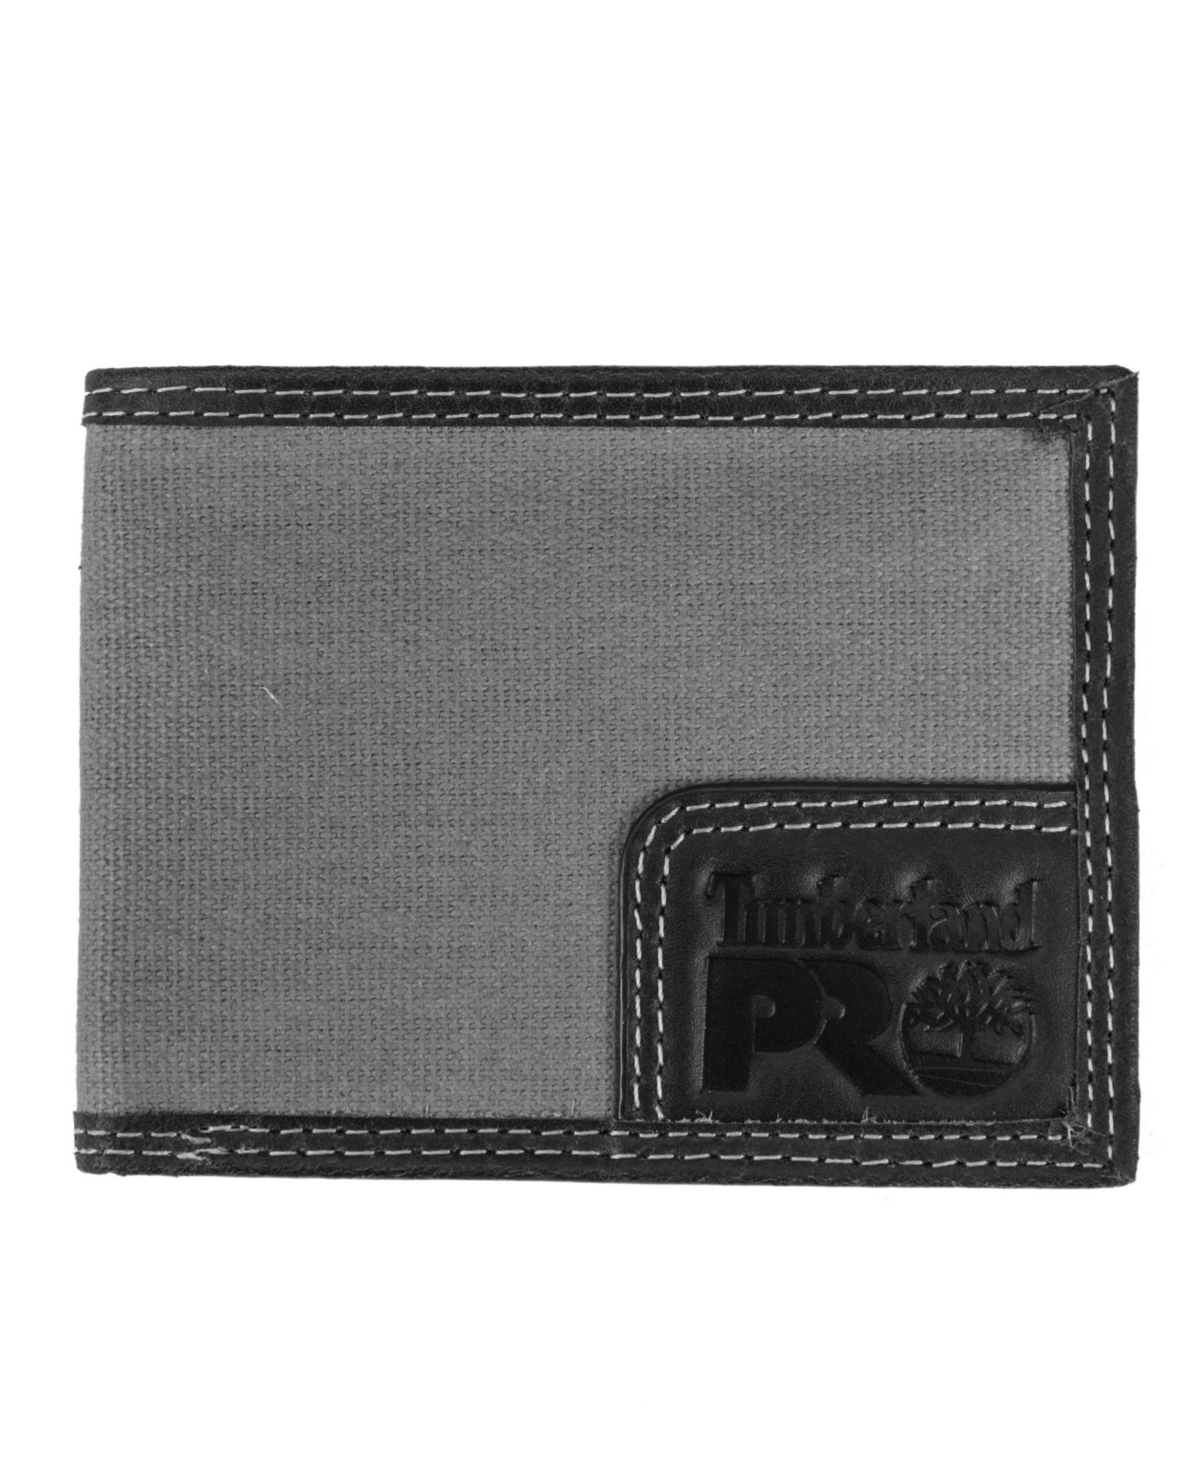 Timberland Pro Men's Whitney Canvas Billfold Wallet In -charcoa